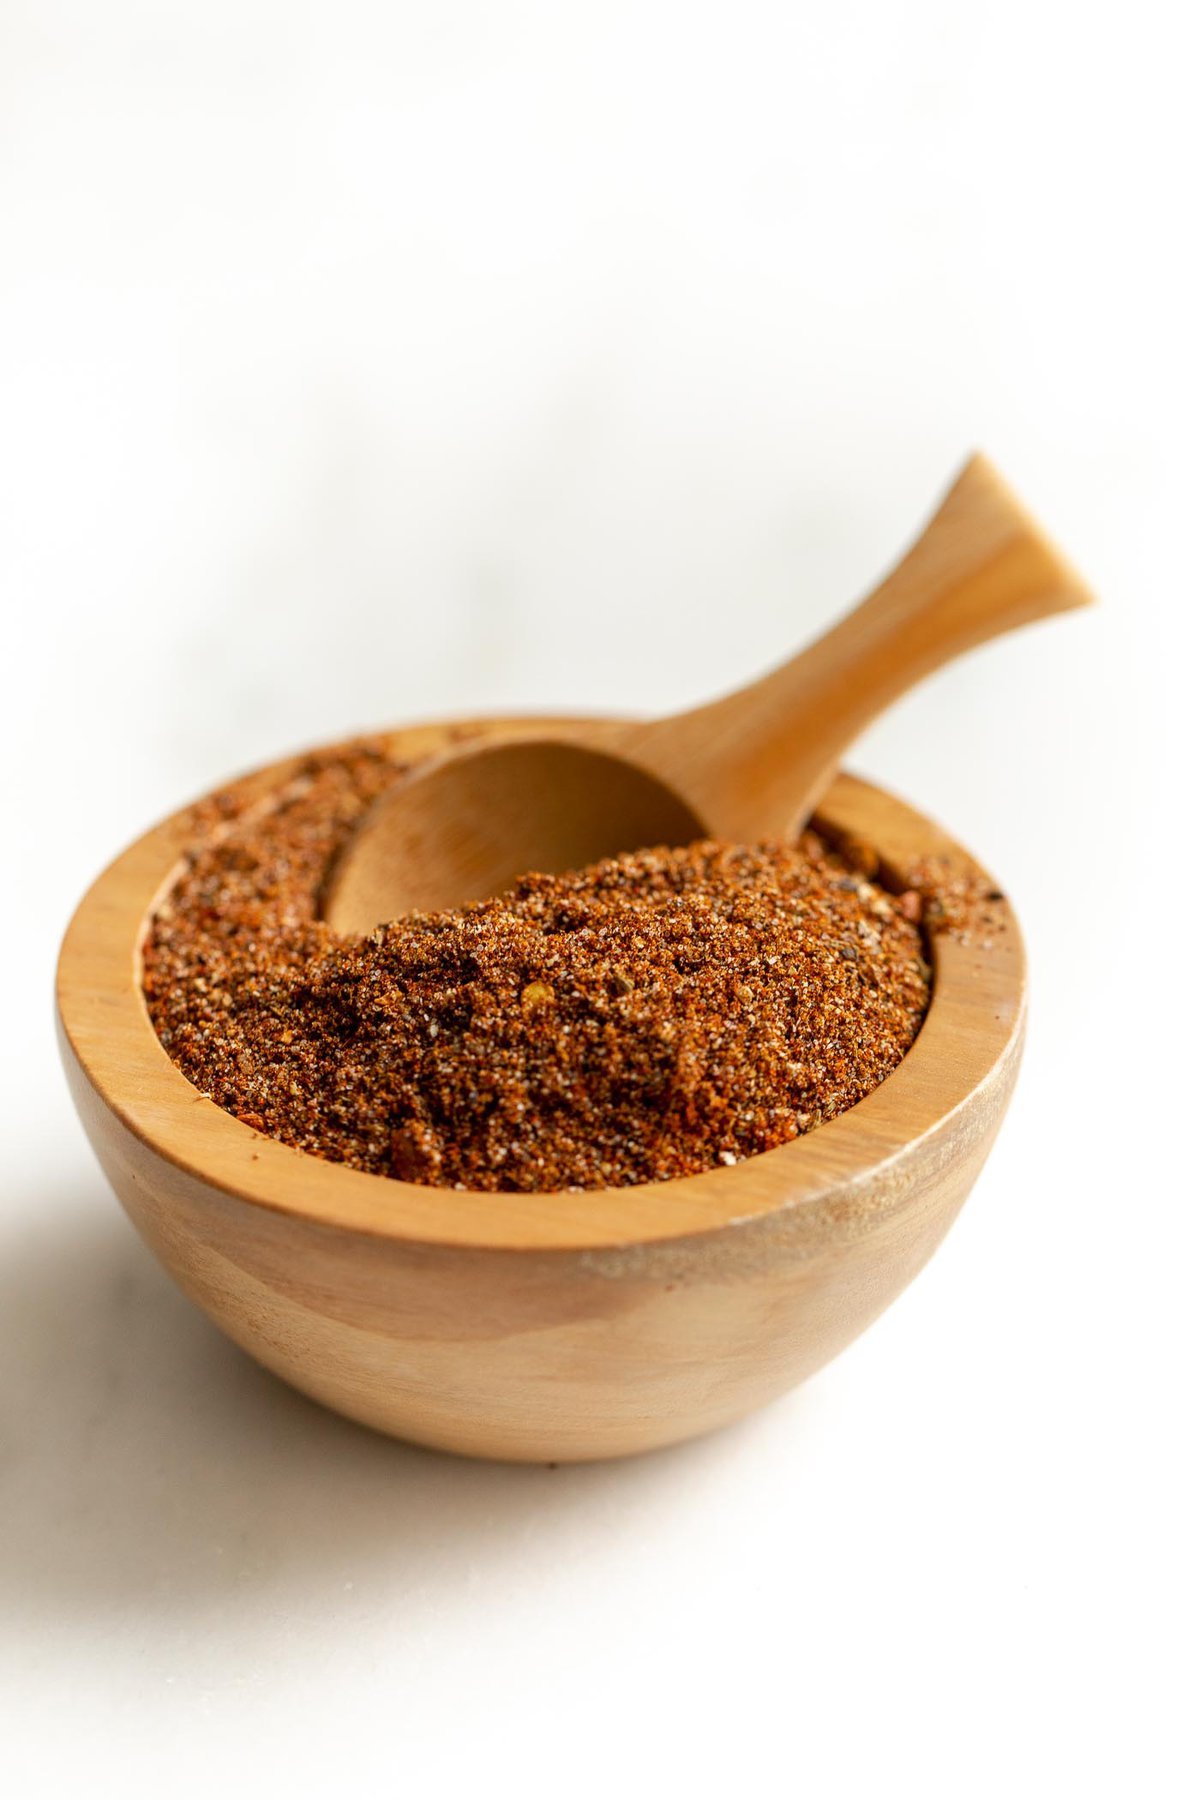 A small wooden bowl full of homemade taco seasoning, with a wooden teaspoon inside.